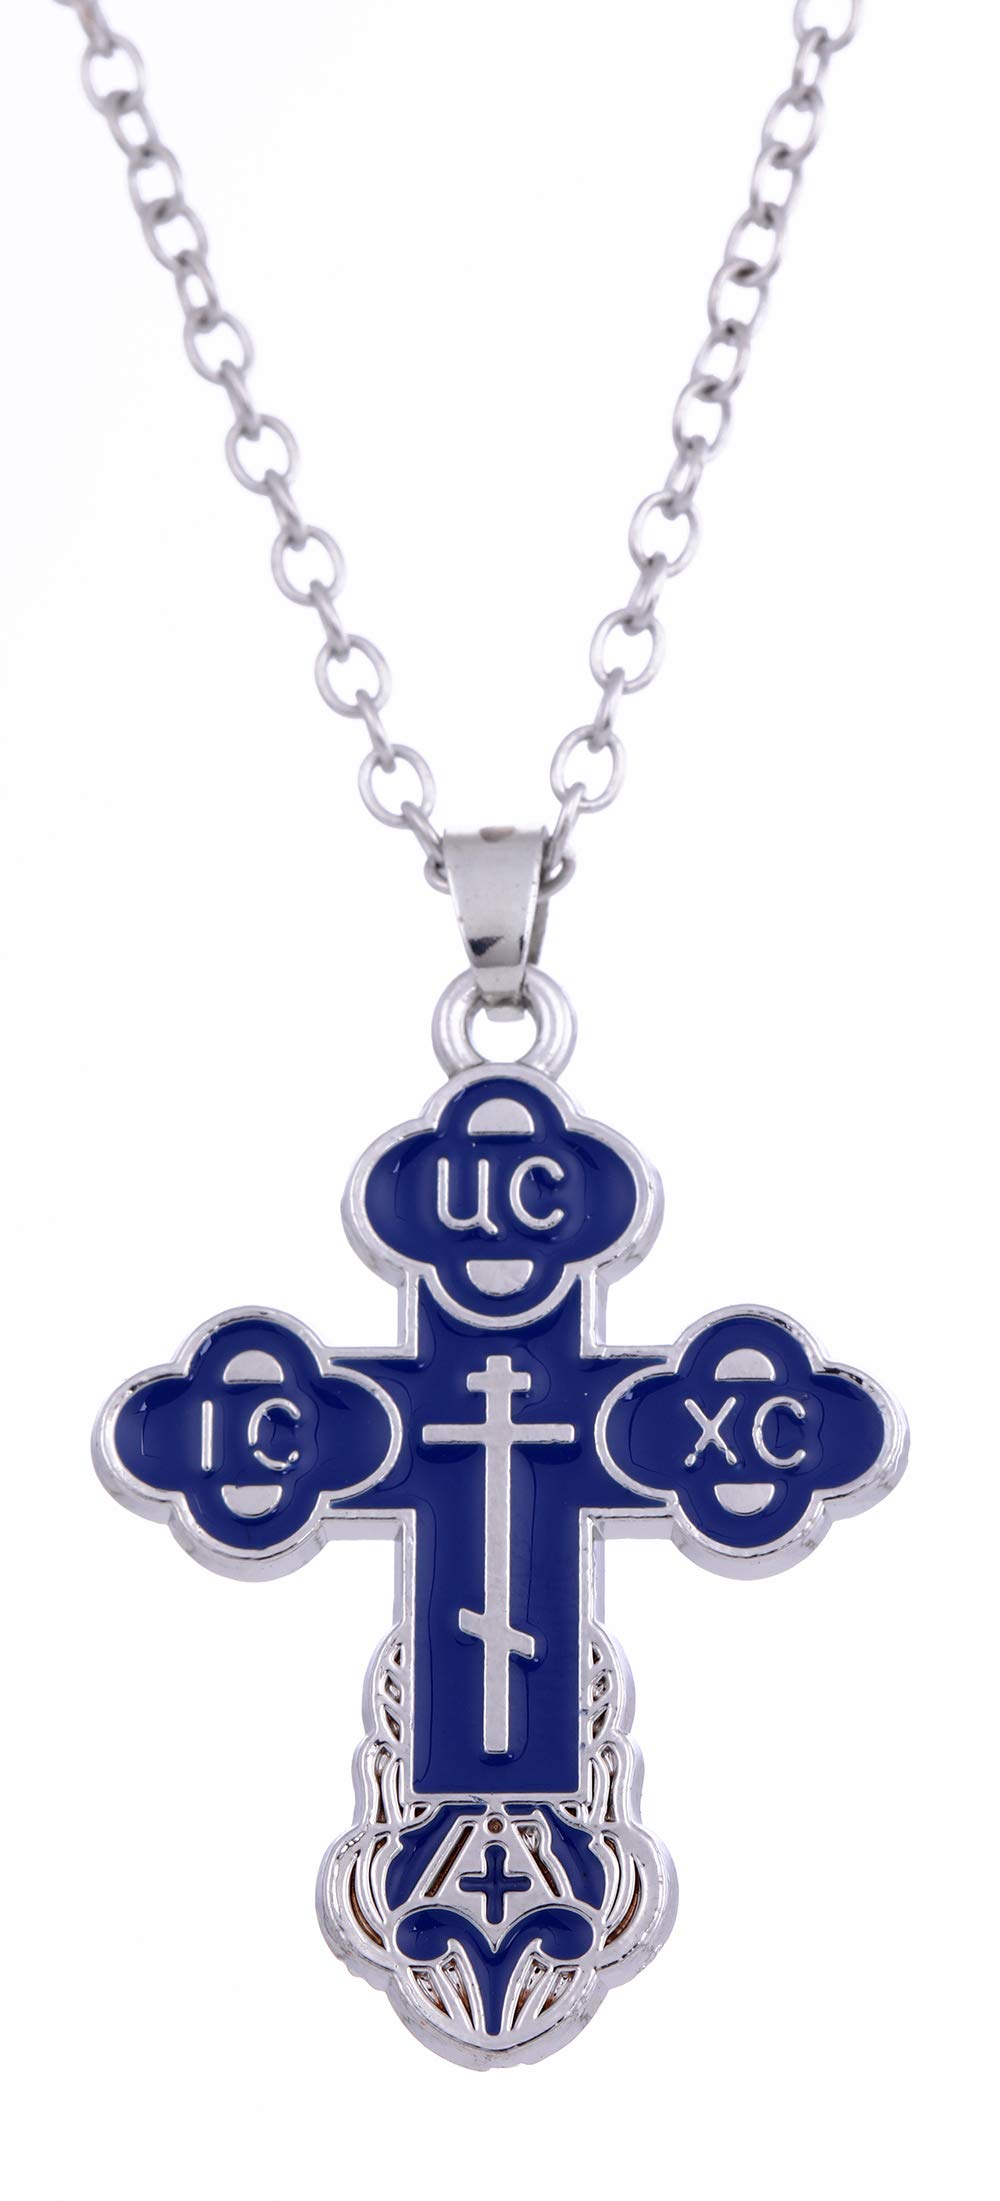 TEAMER Cross Necklace Russian Orthodox Crucifix Eastern Church Necklace Religious Christian Prayer Jewelry for Men Women